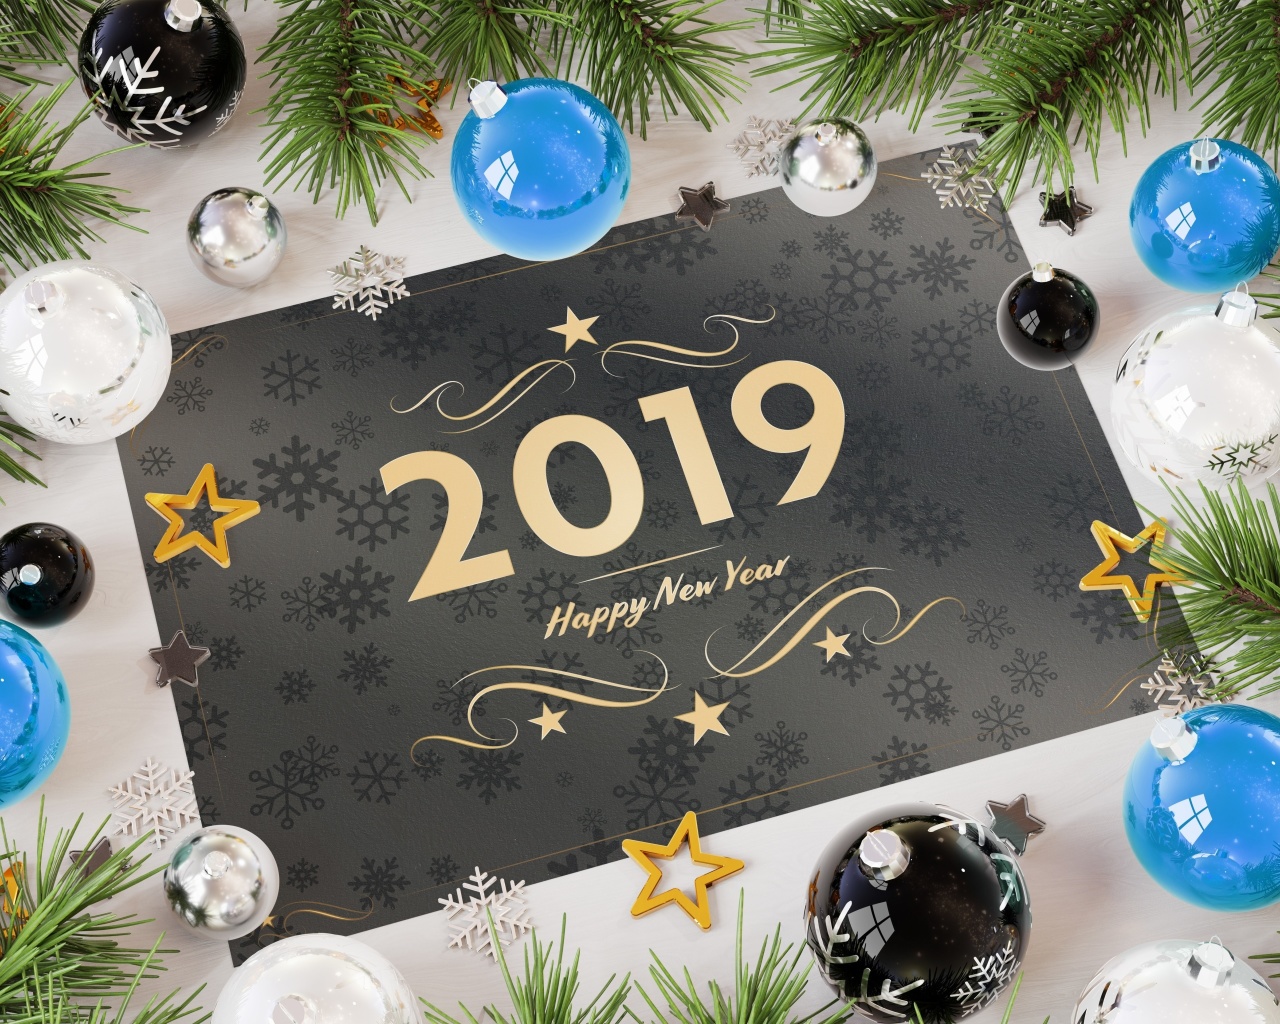 2019 Happy New Year Message wallpaper 1280x1024